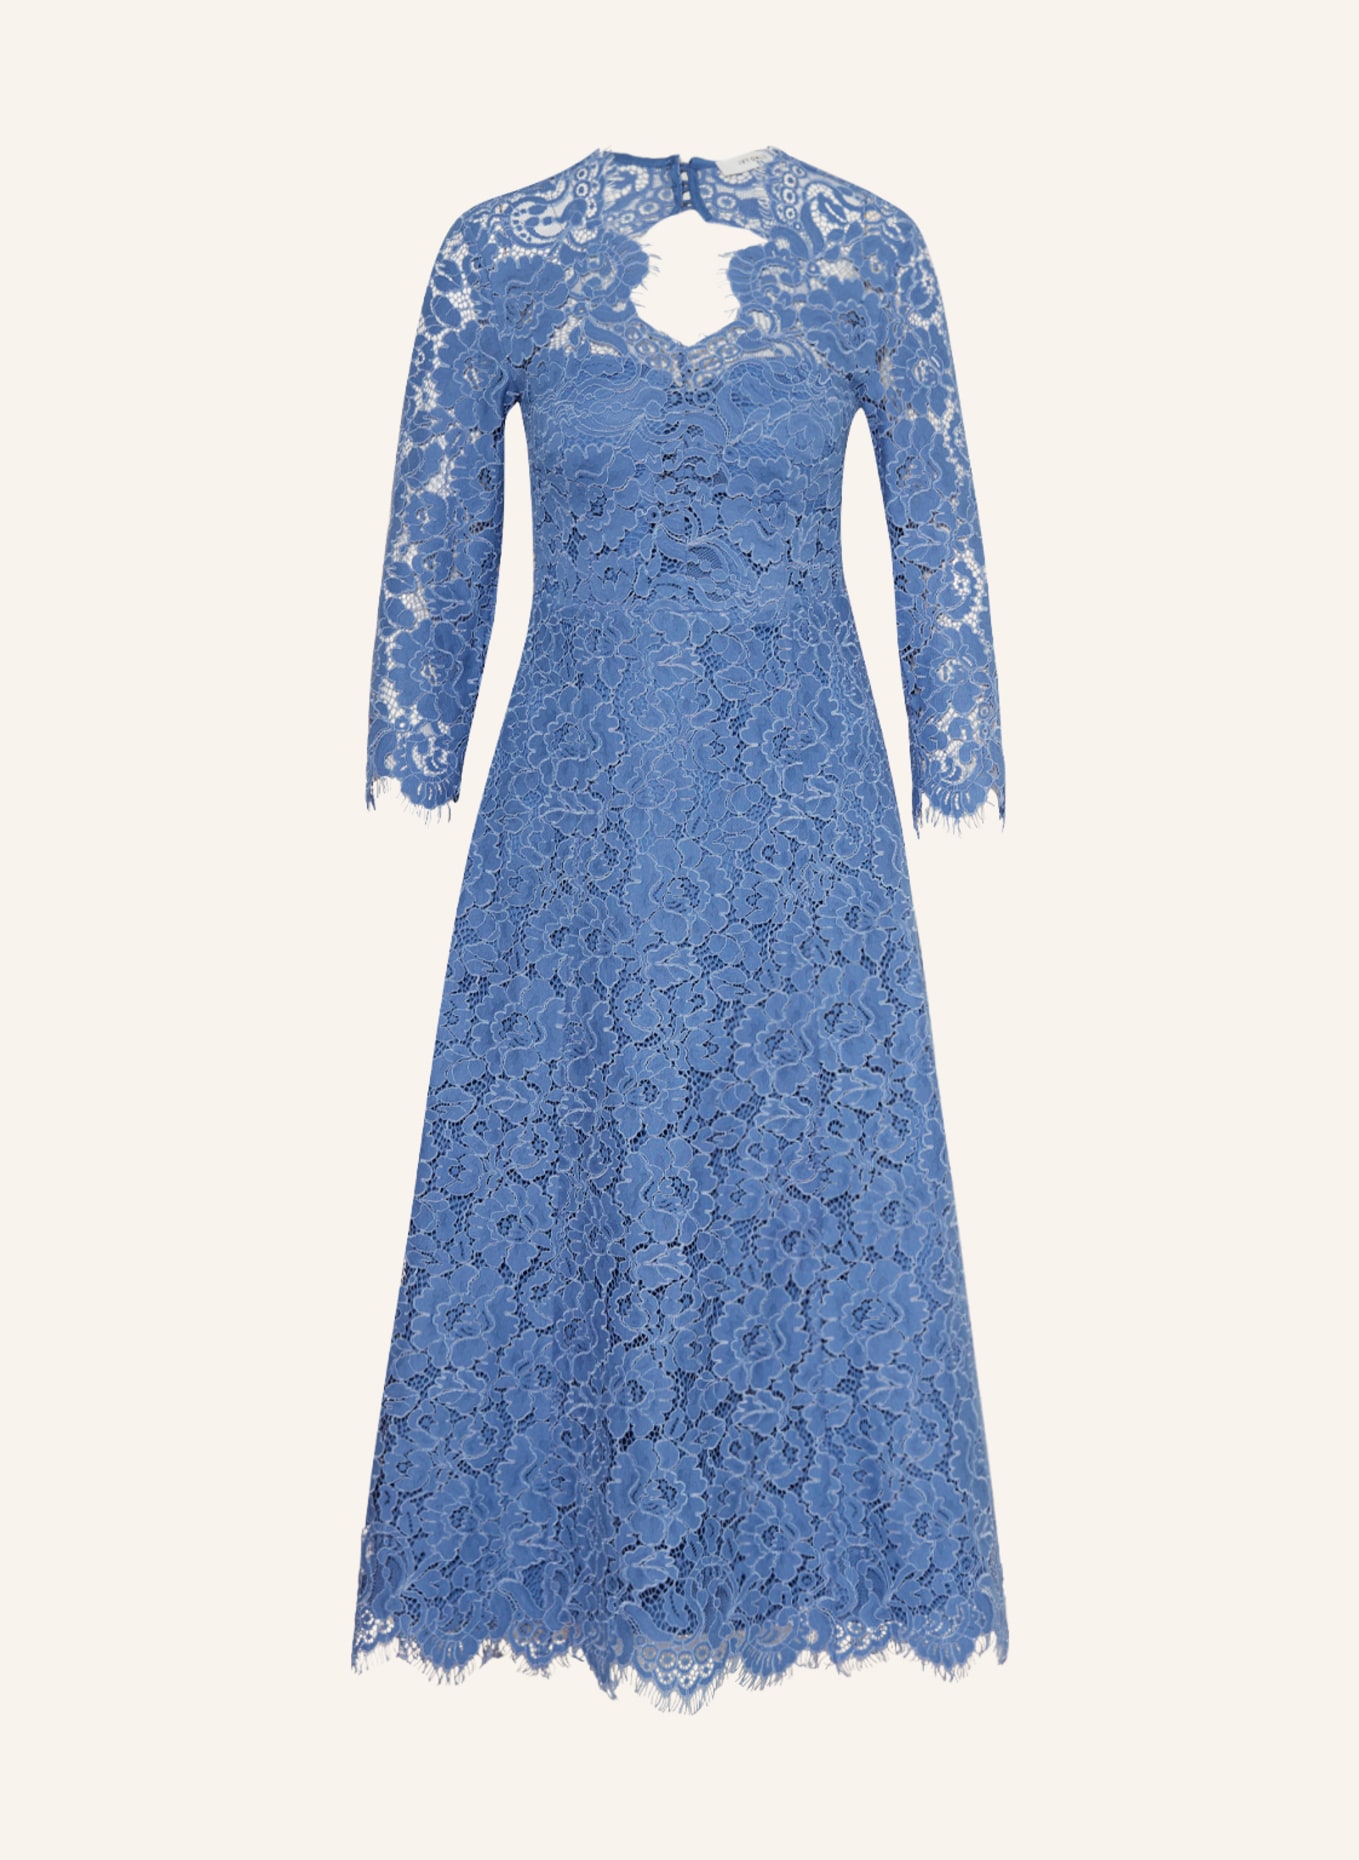 IVY OAK Cocktail dress MADELEINE in lace with cut-out, Color: BLUE (Image 1)